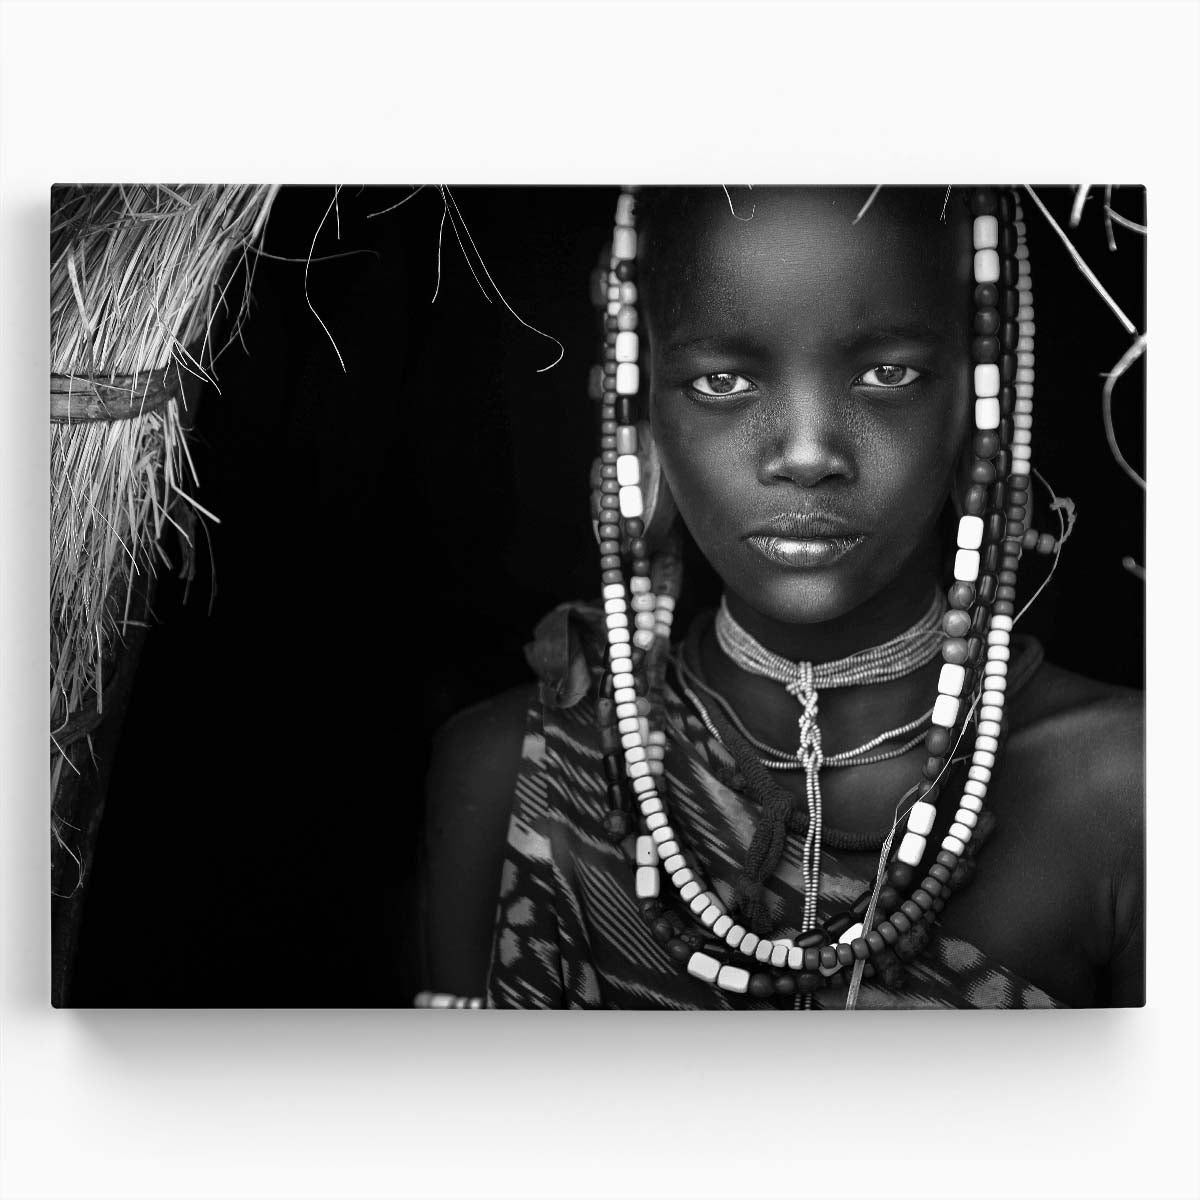 Mursi Girl Portrait in Monochrome Beads Wall Art by Luxuriance Designs. Made in USA.